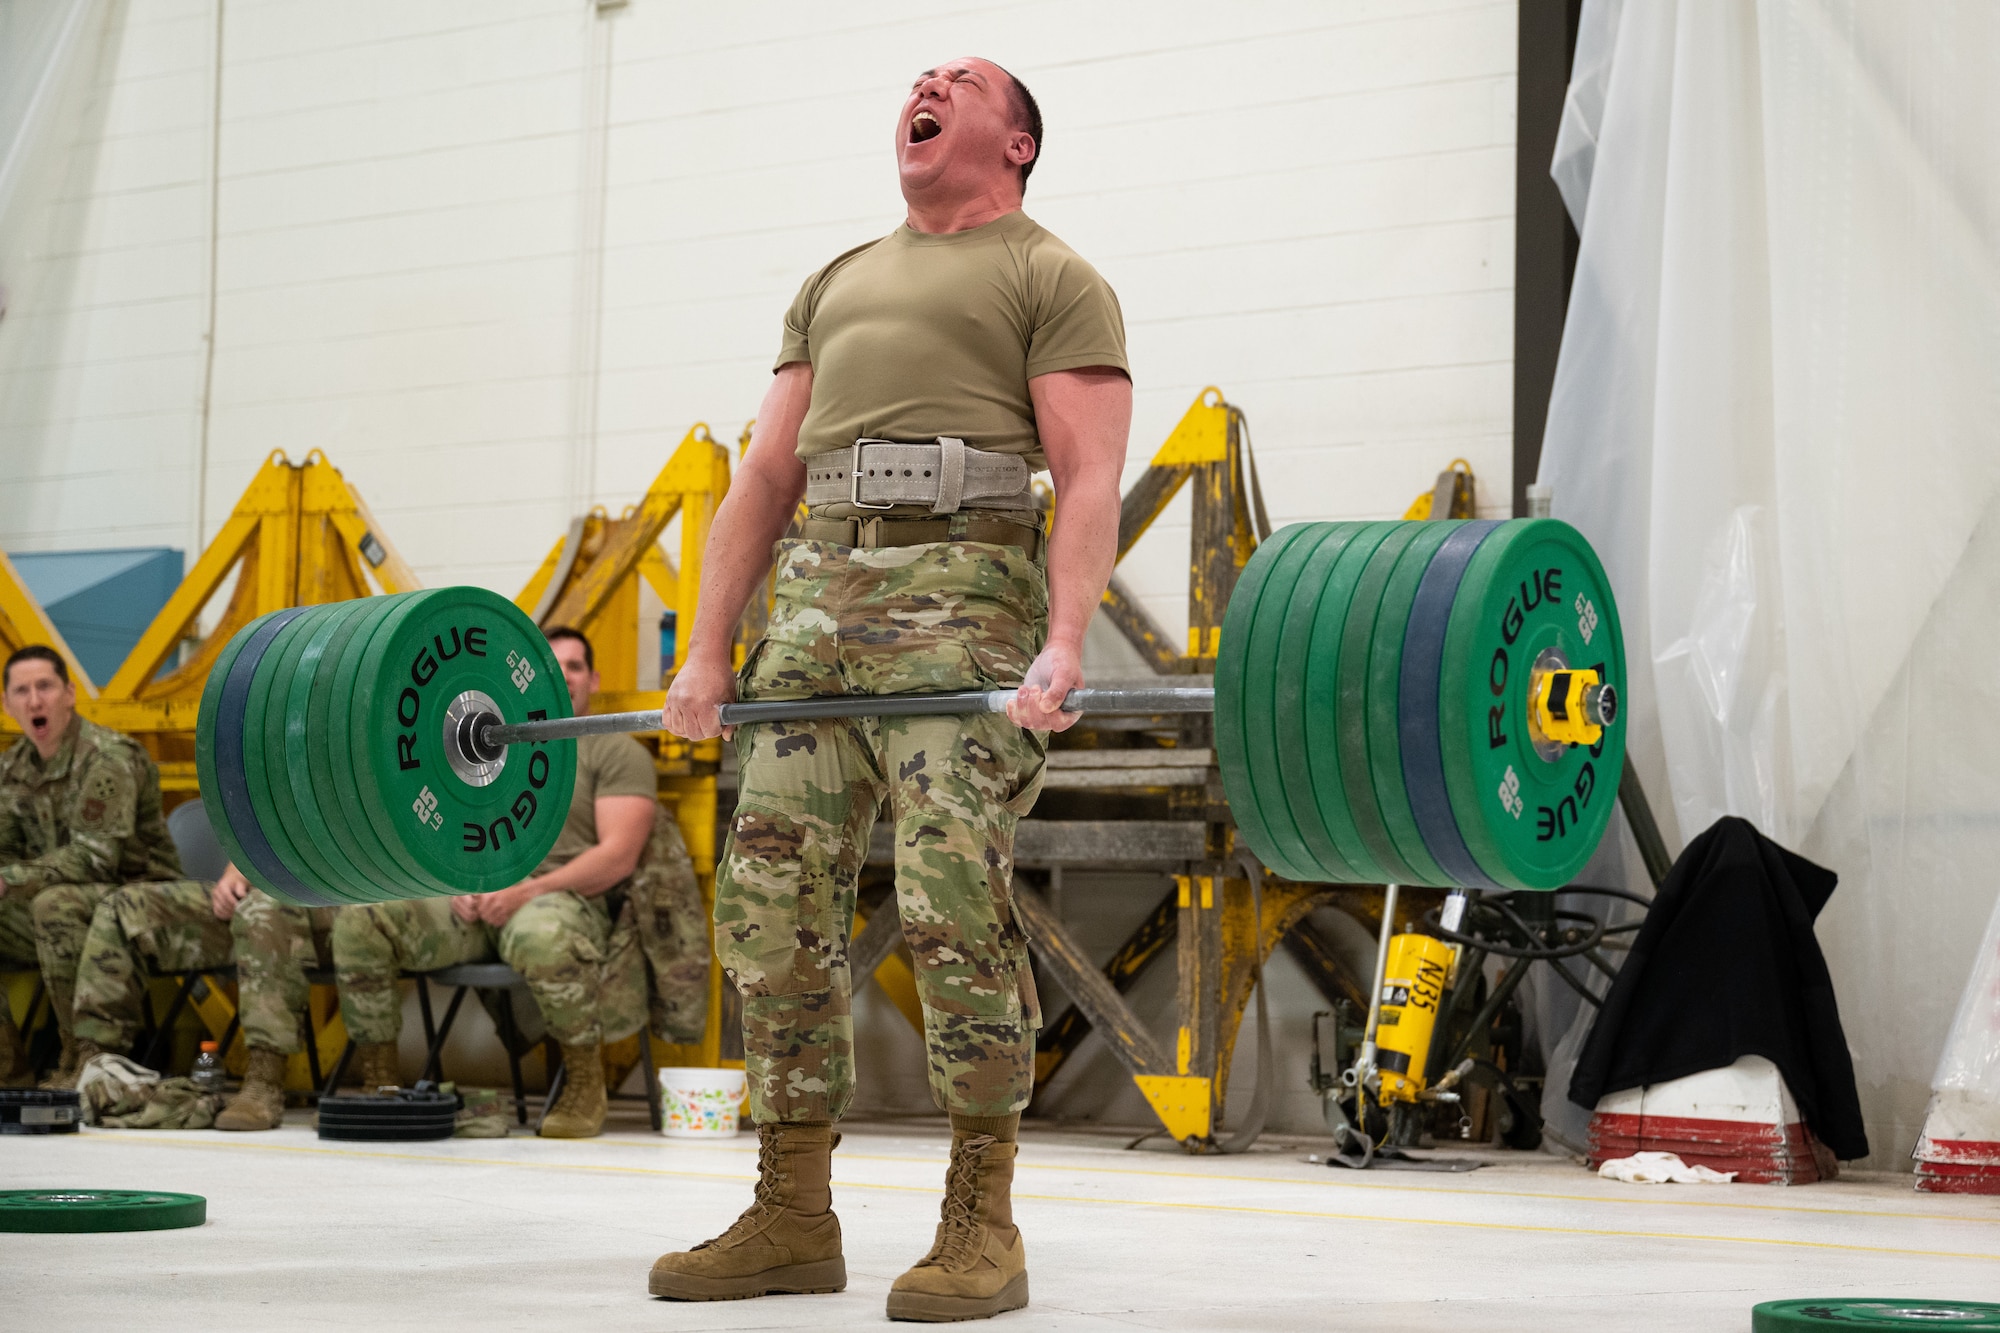 A man dead-lifting a barbell loaded with weight.